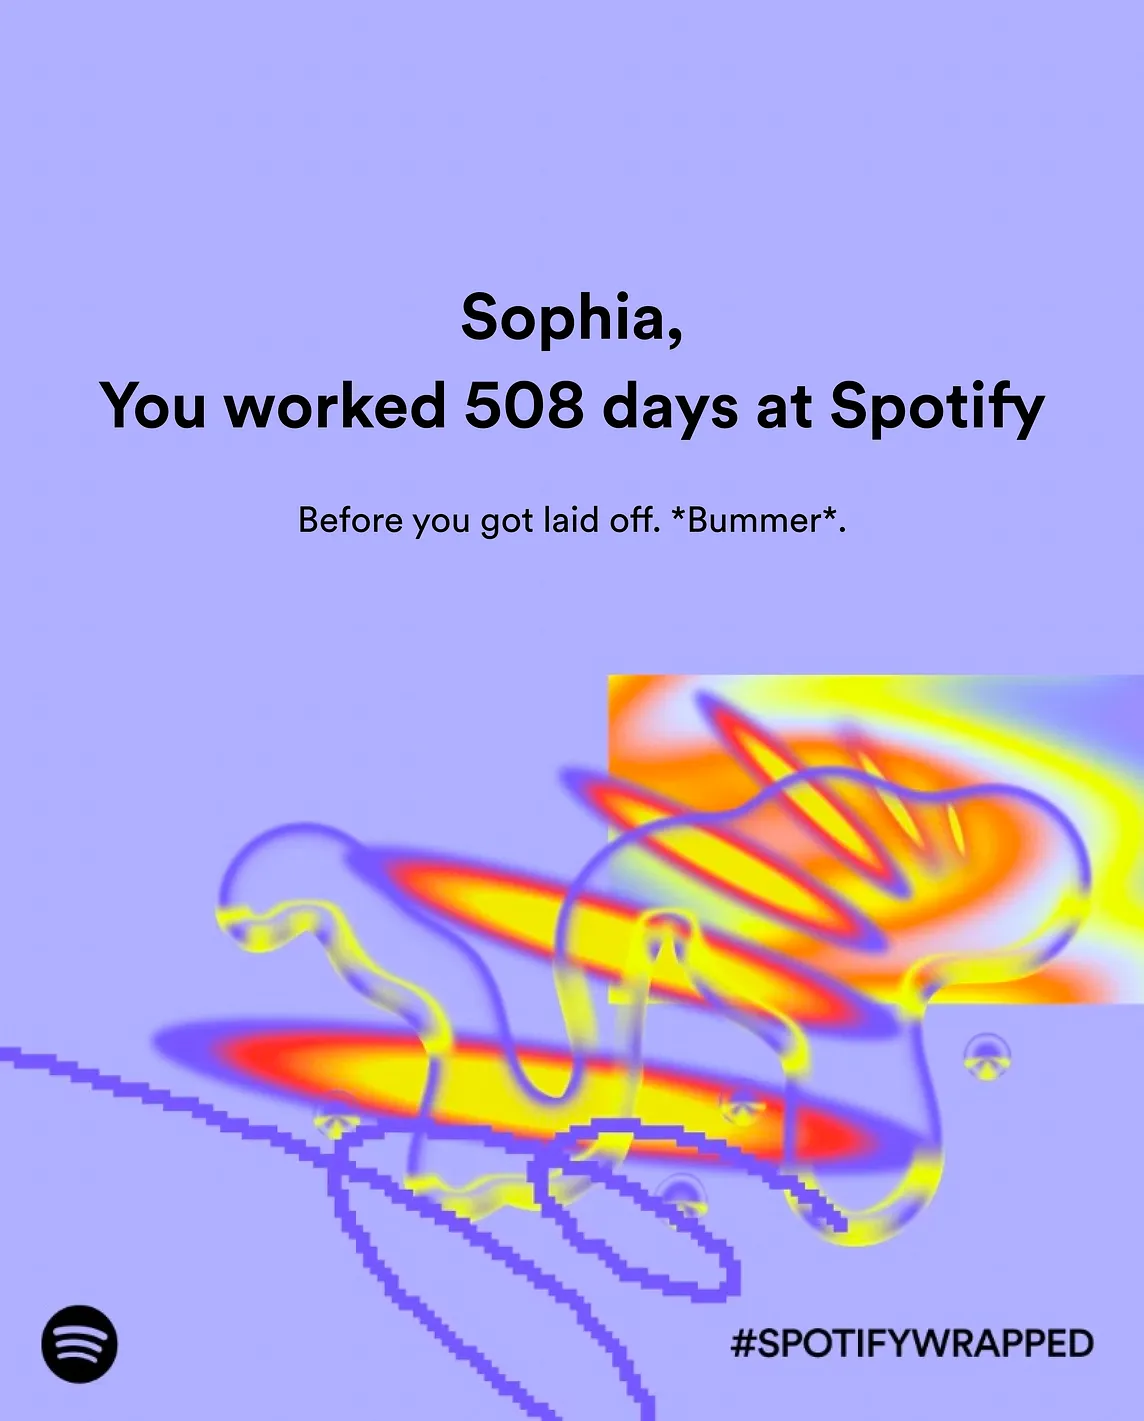 A recreation of a marketing image generated from Spotify Wrapped, edited to reflect my own Spotify journey